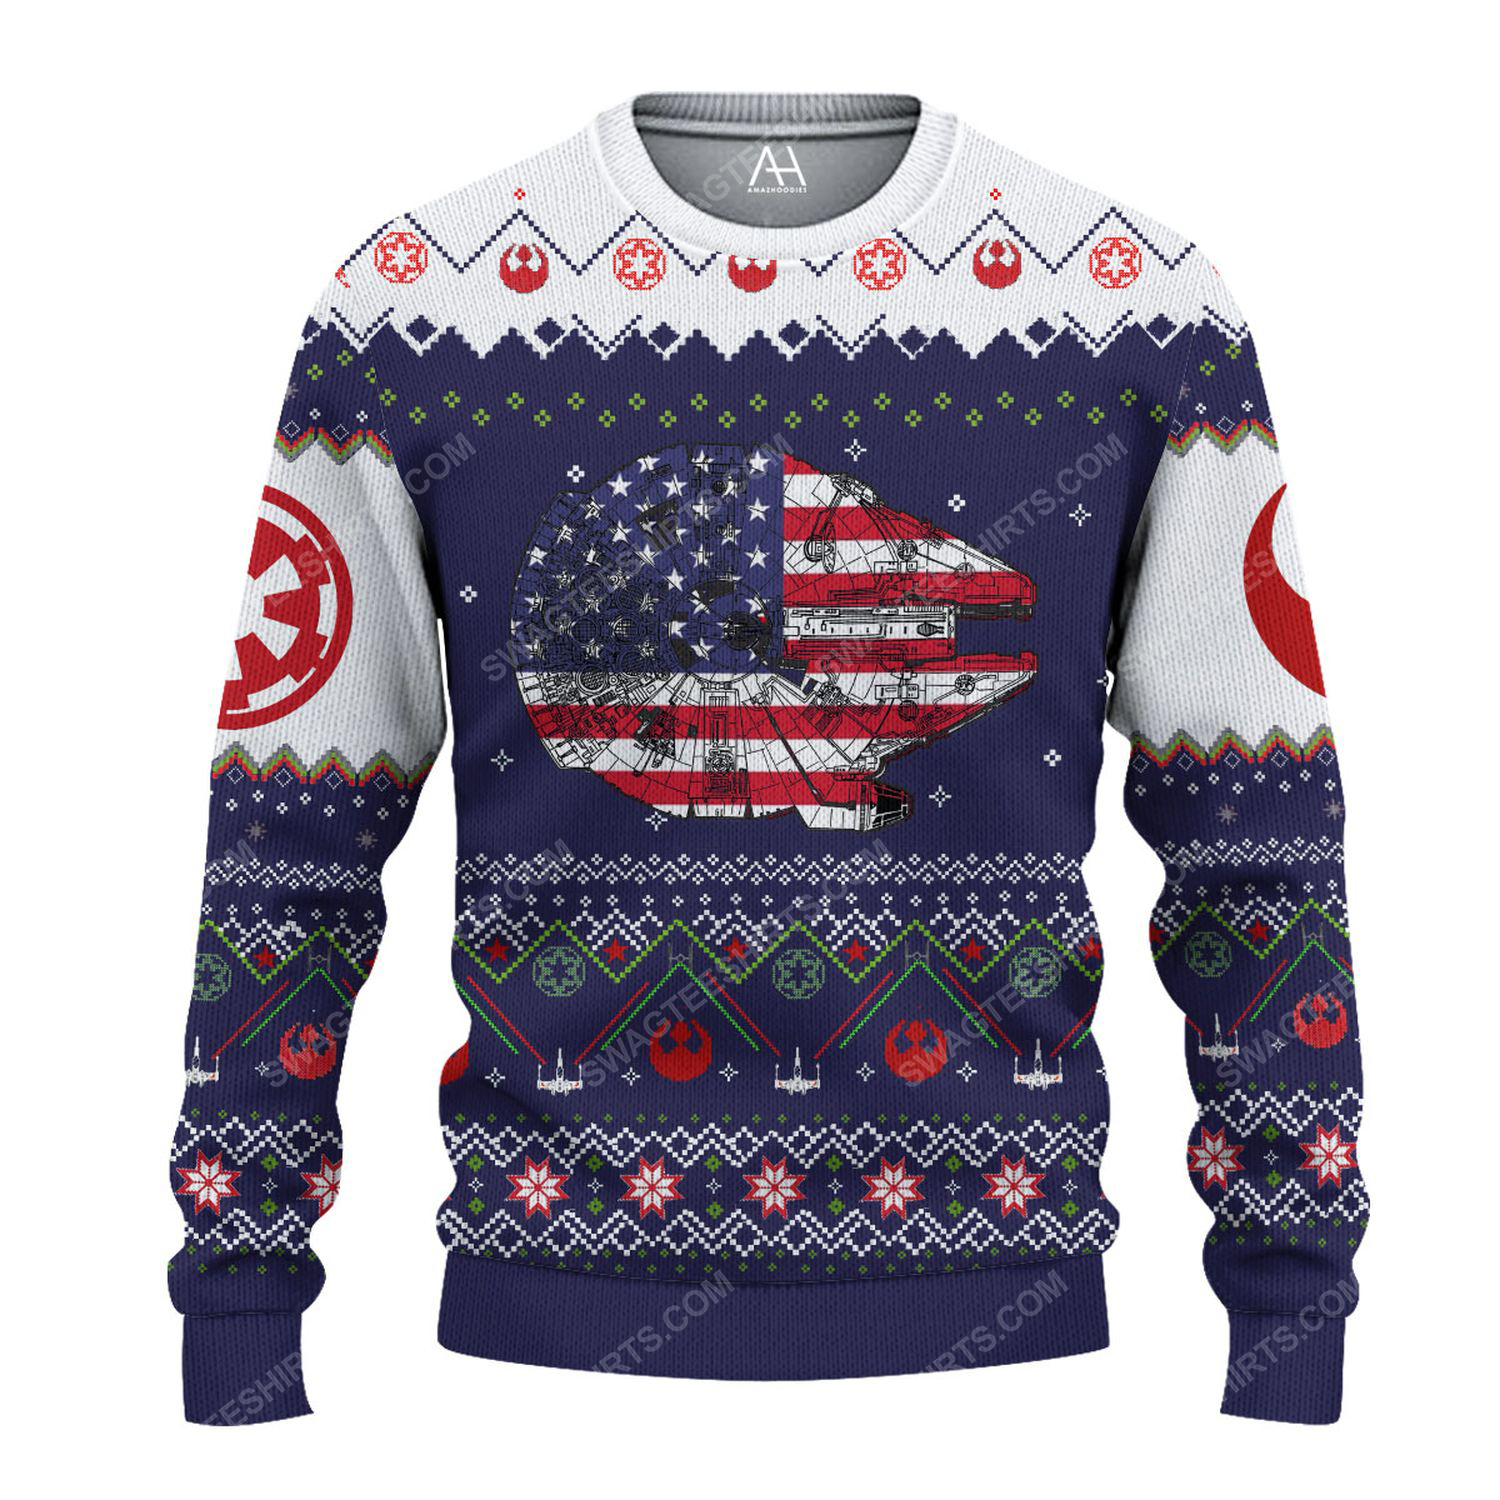 Star wars spaceships american flag ugly christmas sweater 1 - Copy (3)